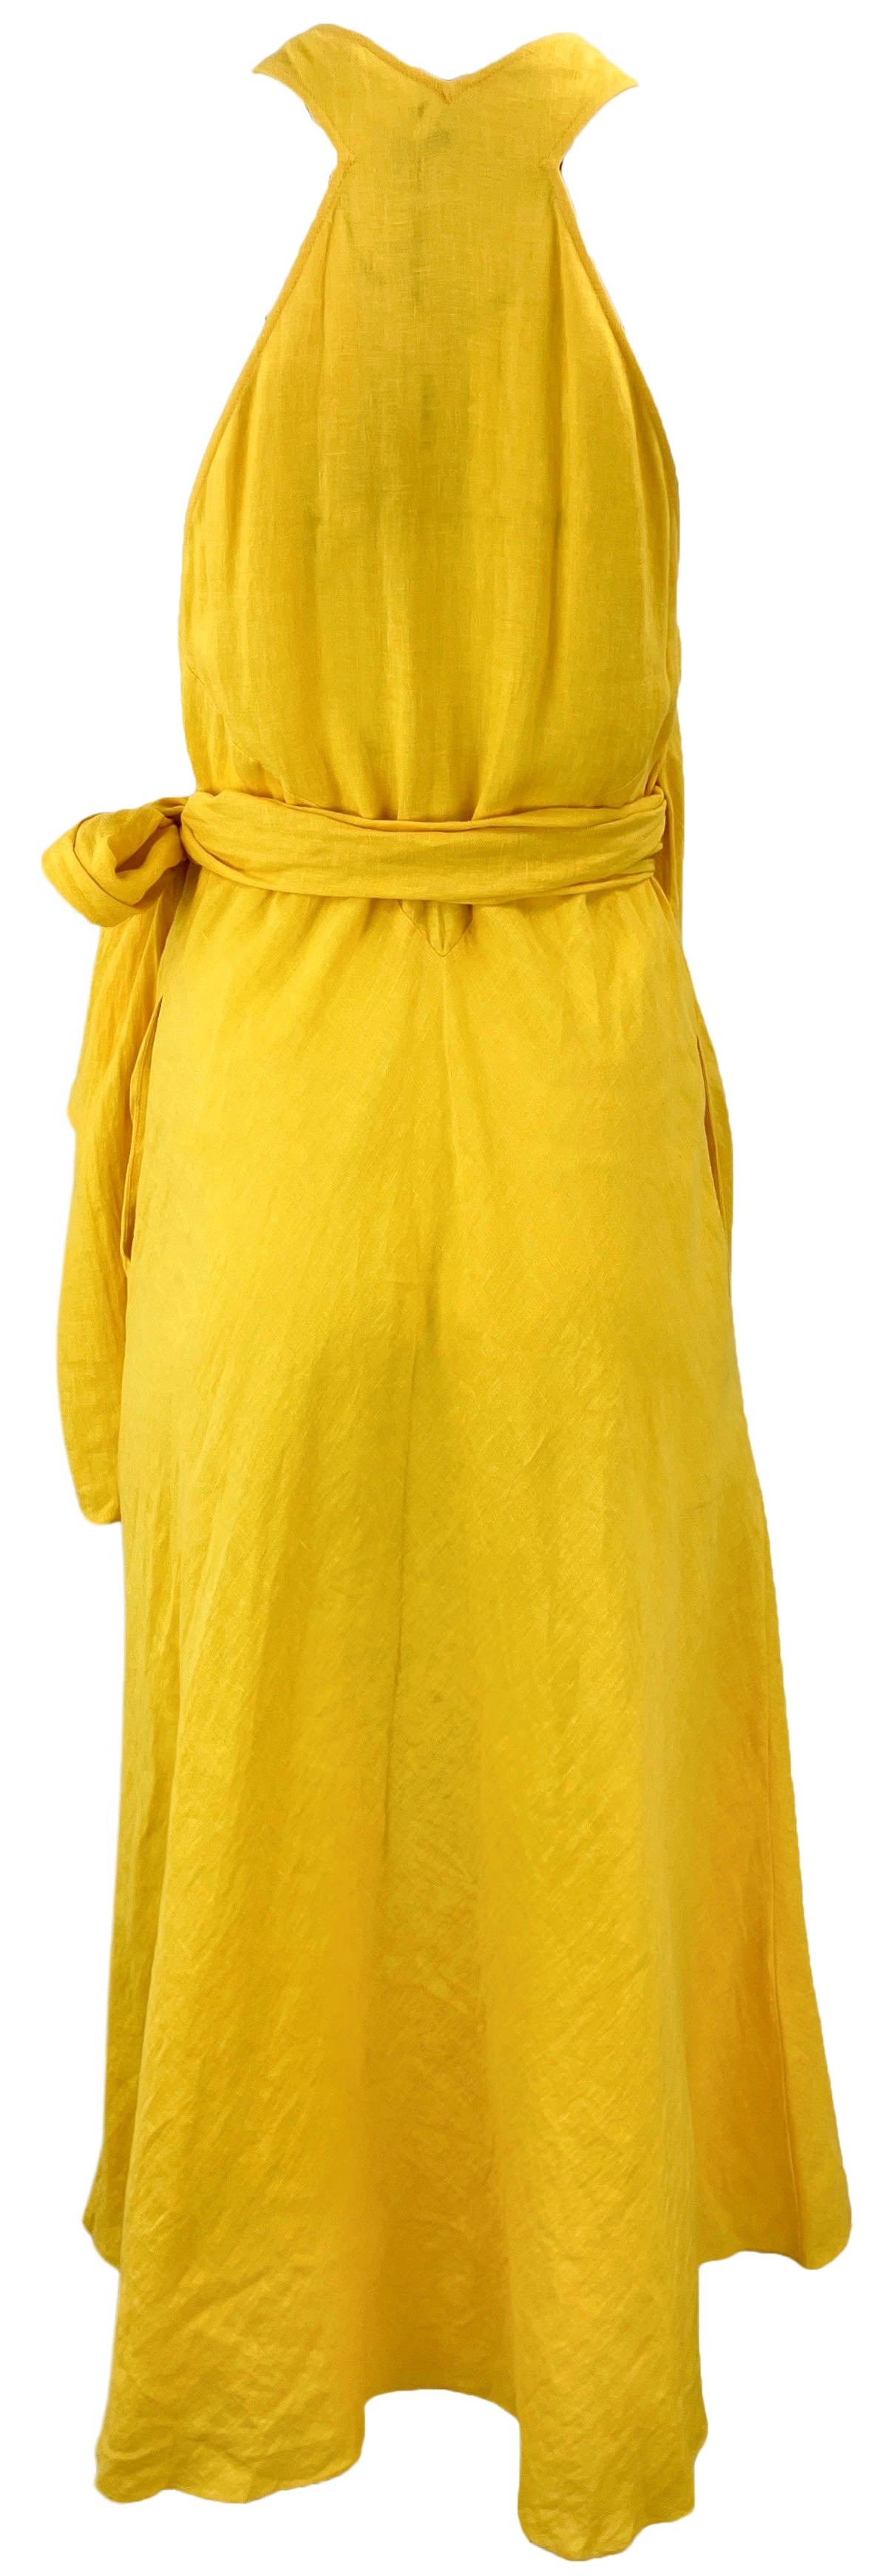 Three Graces Linnea Linen Dress in Sunny Yellow - Discounts on Three Graces at UAL